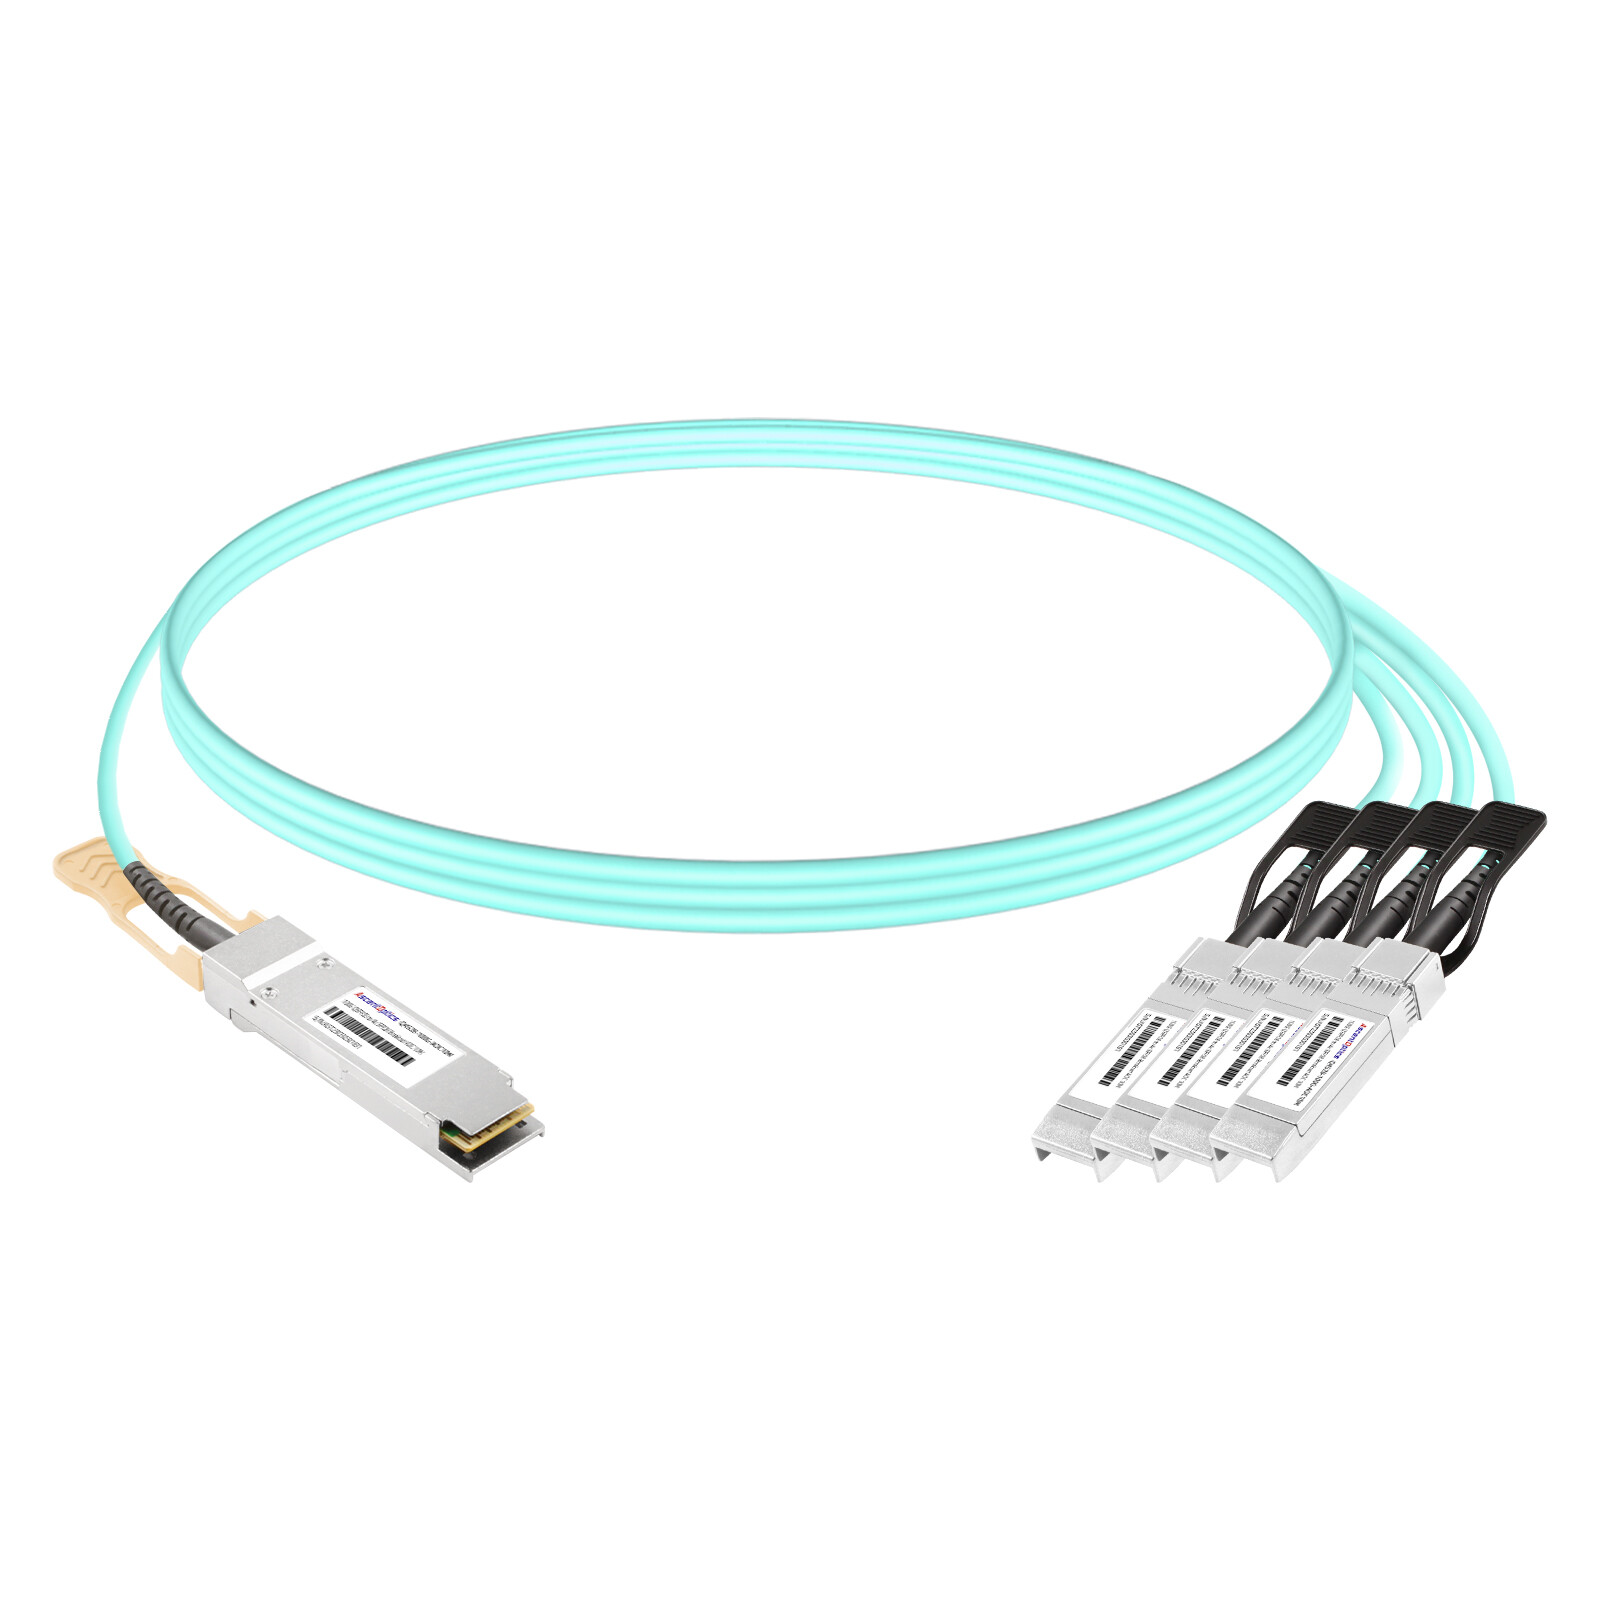 100G QSFP28 to 4x 25G SFP28 Breakout AOC Cable,10 Meters